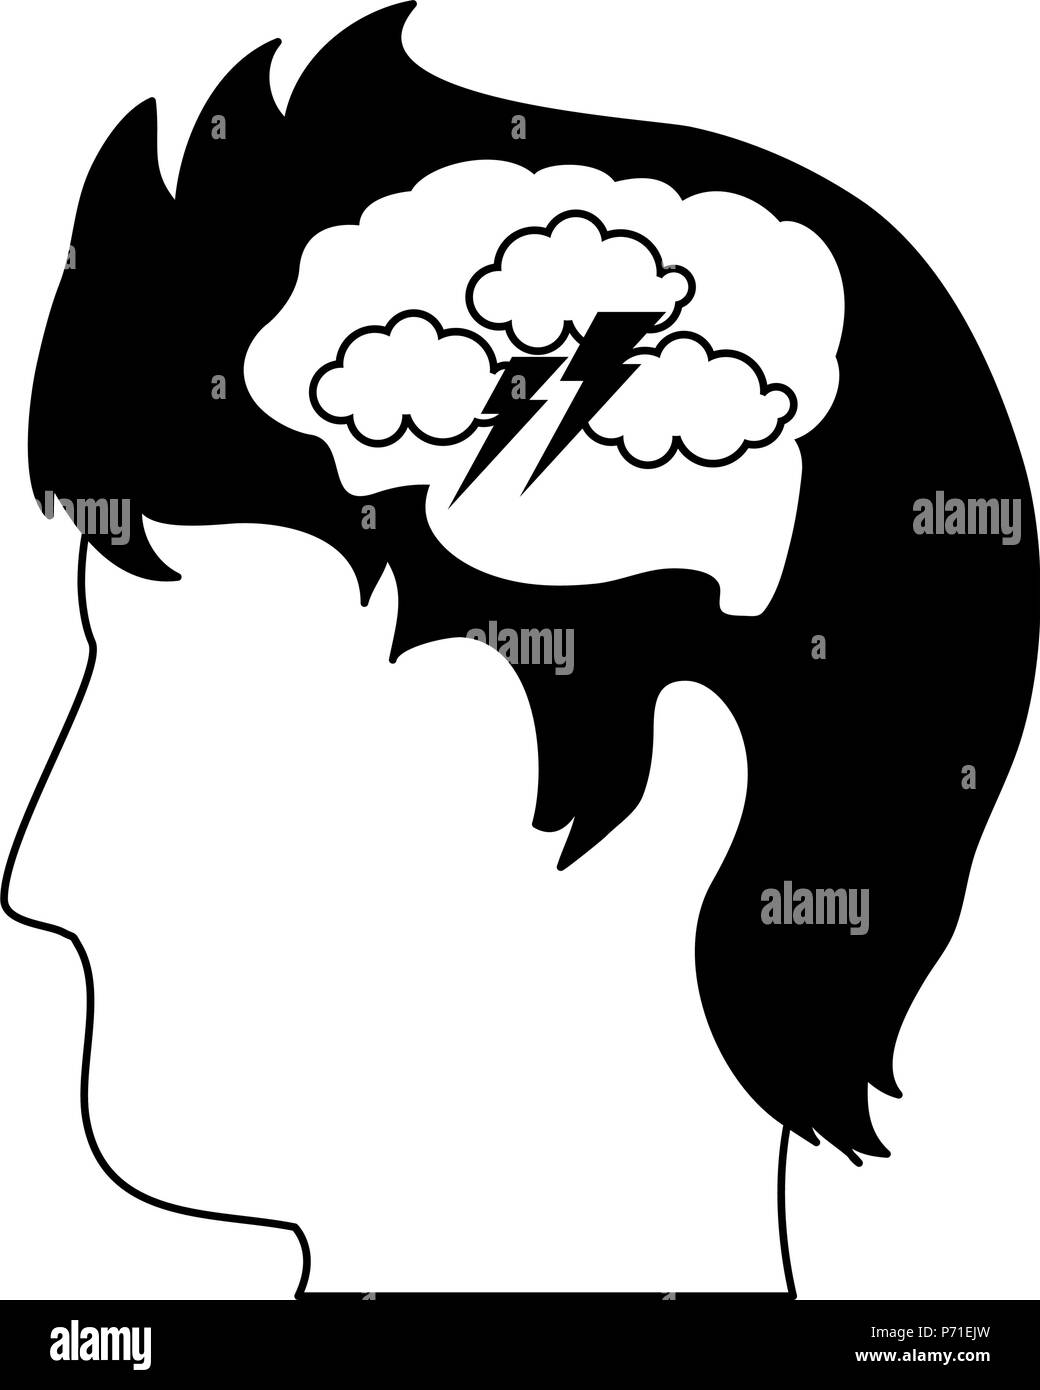 Attacked mind cartoon in black and white Stock Vector